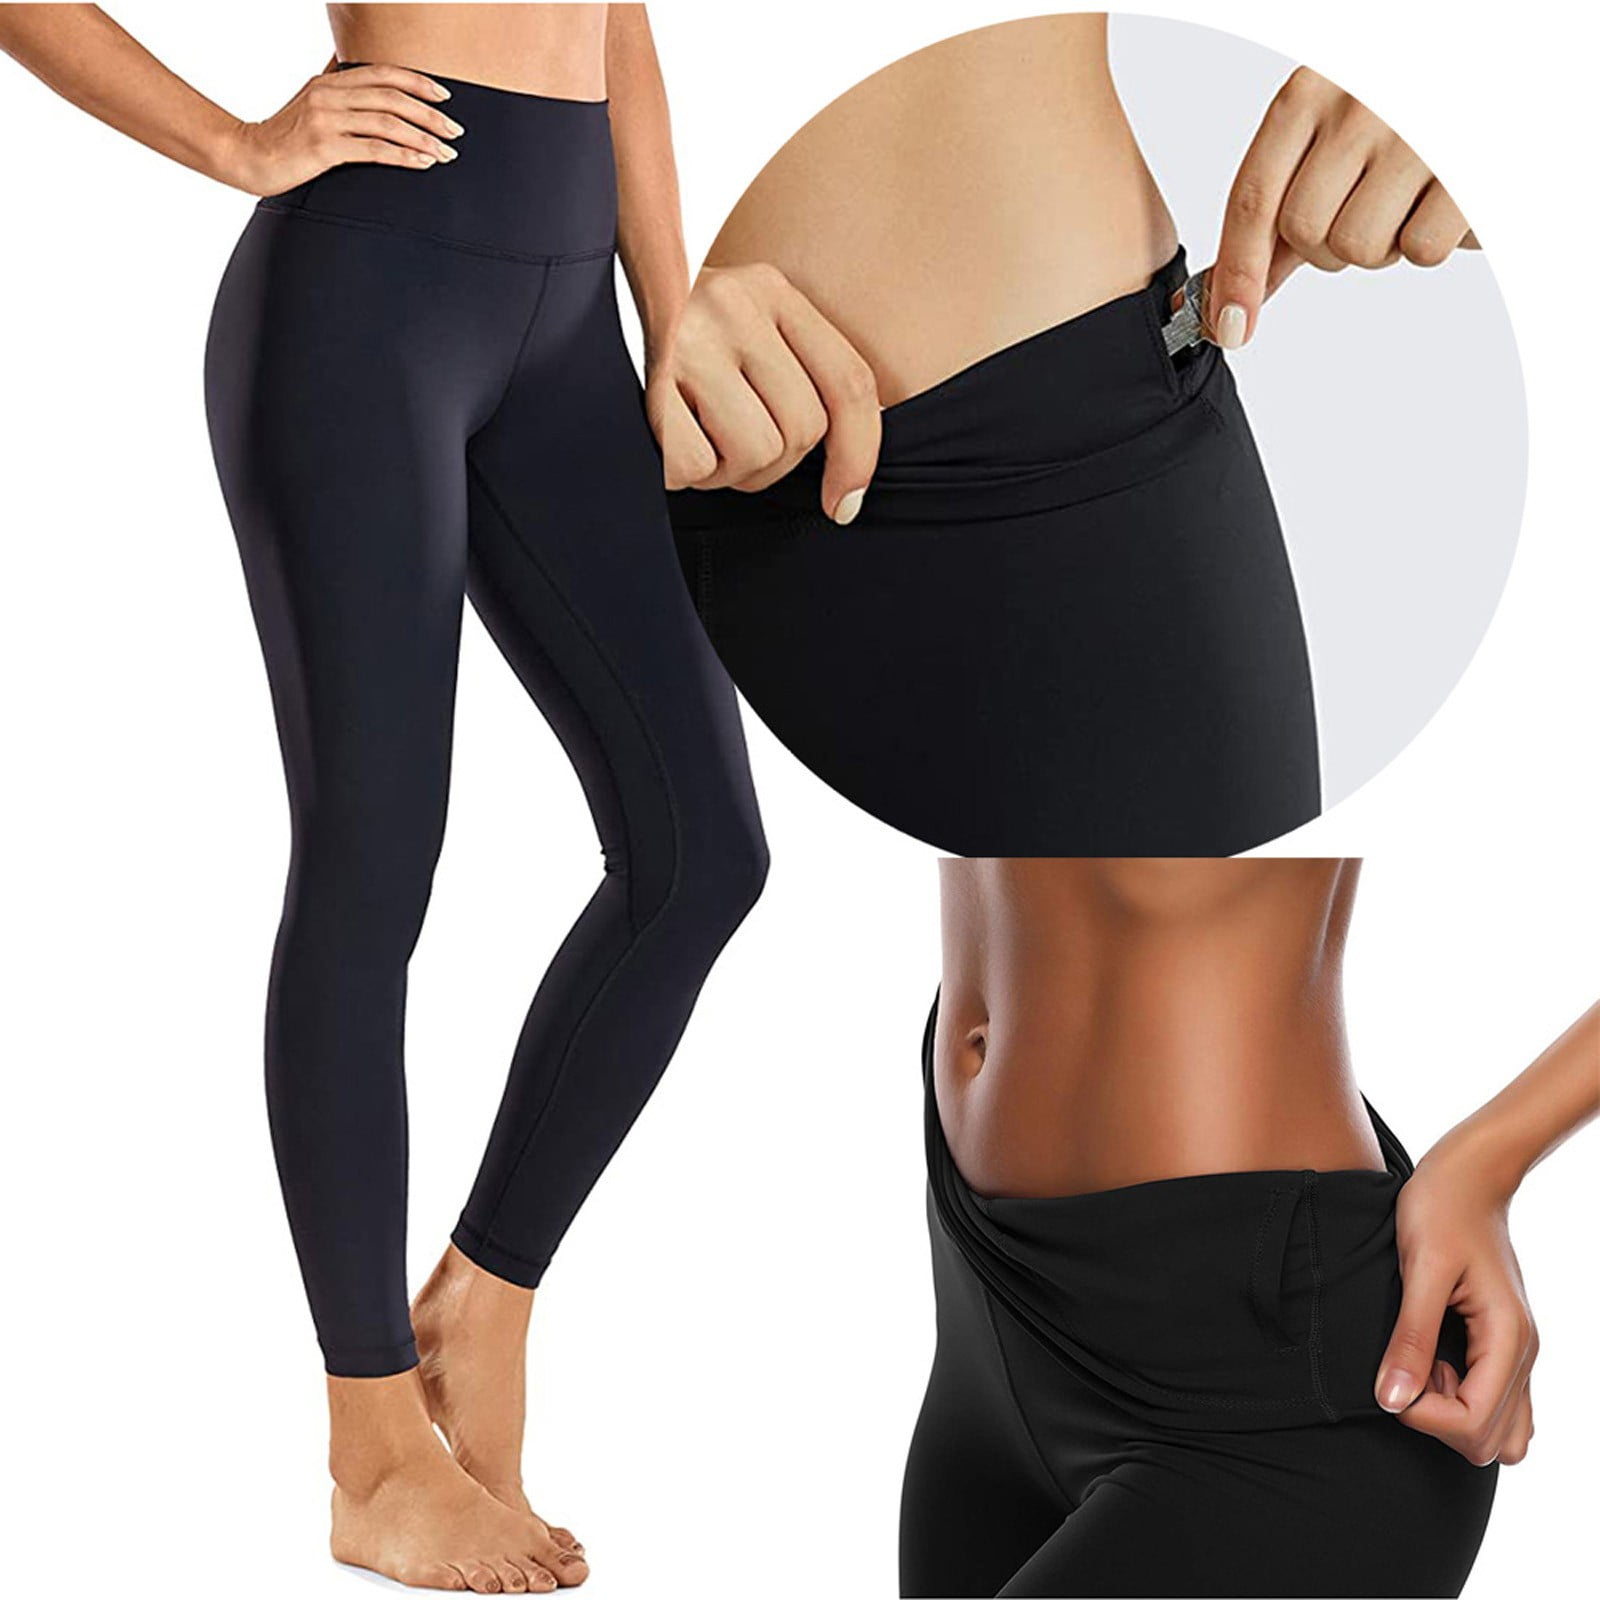 2DXuixsh All Yoga Pants Pants Yoga Fitness Cropped Leggings Sports Womens  3D Print Workout Pants Dark Yoga Pants with Pockets for Women Polyester()